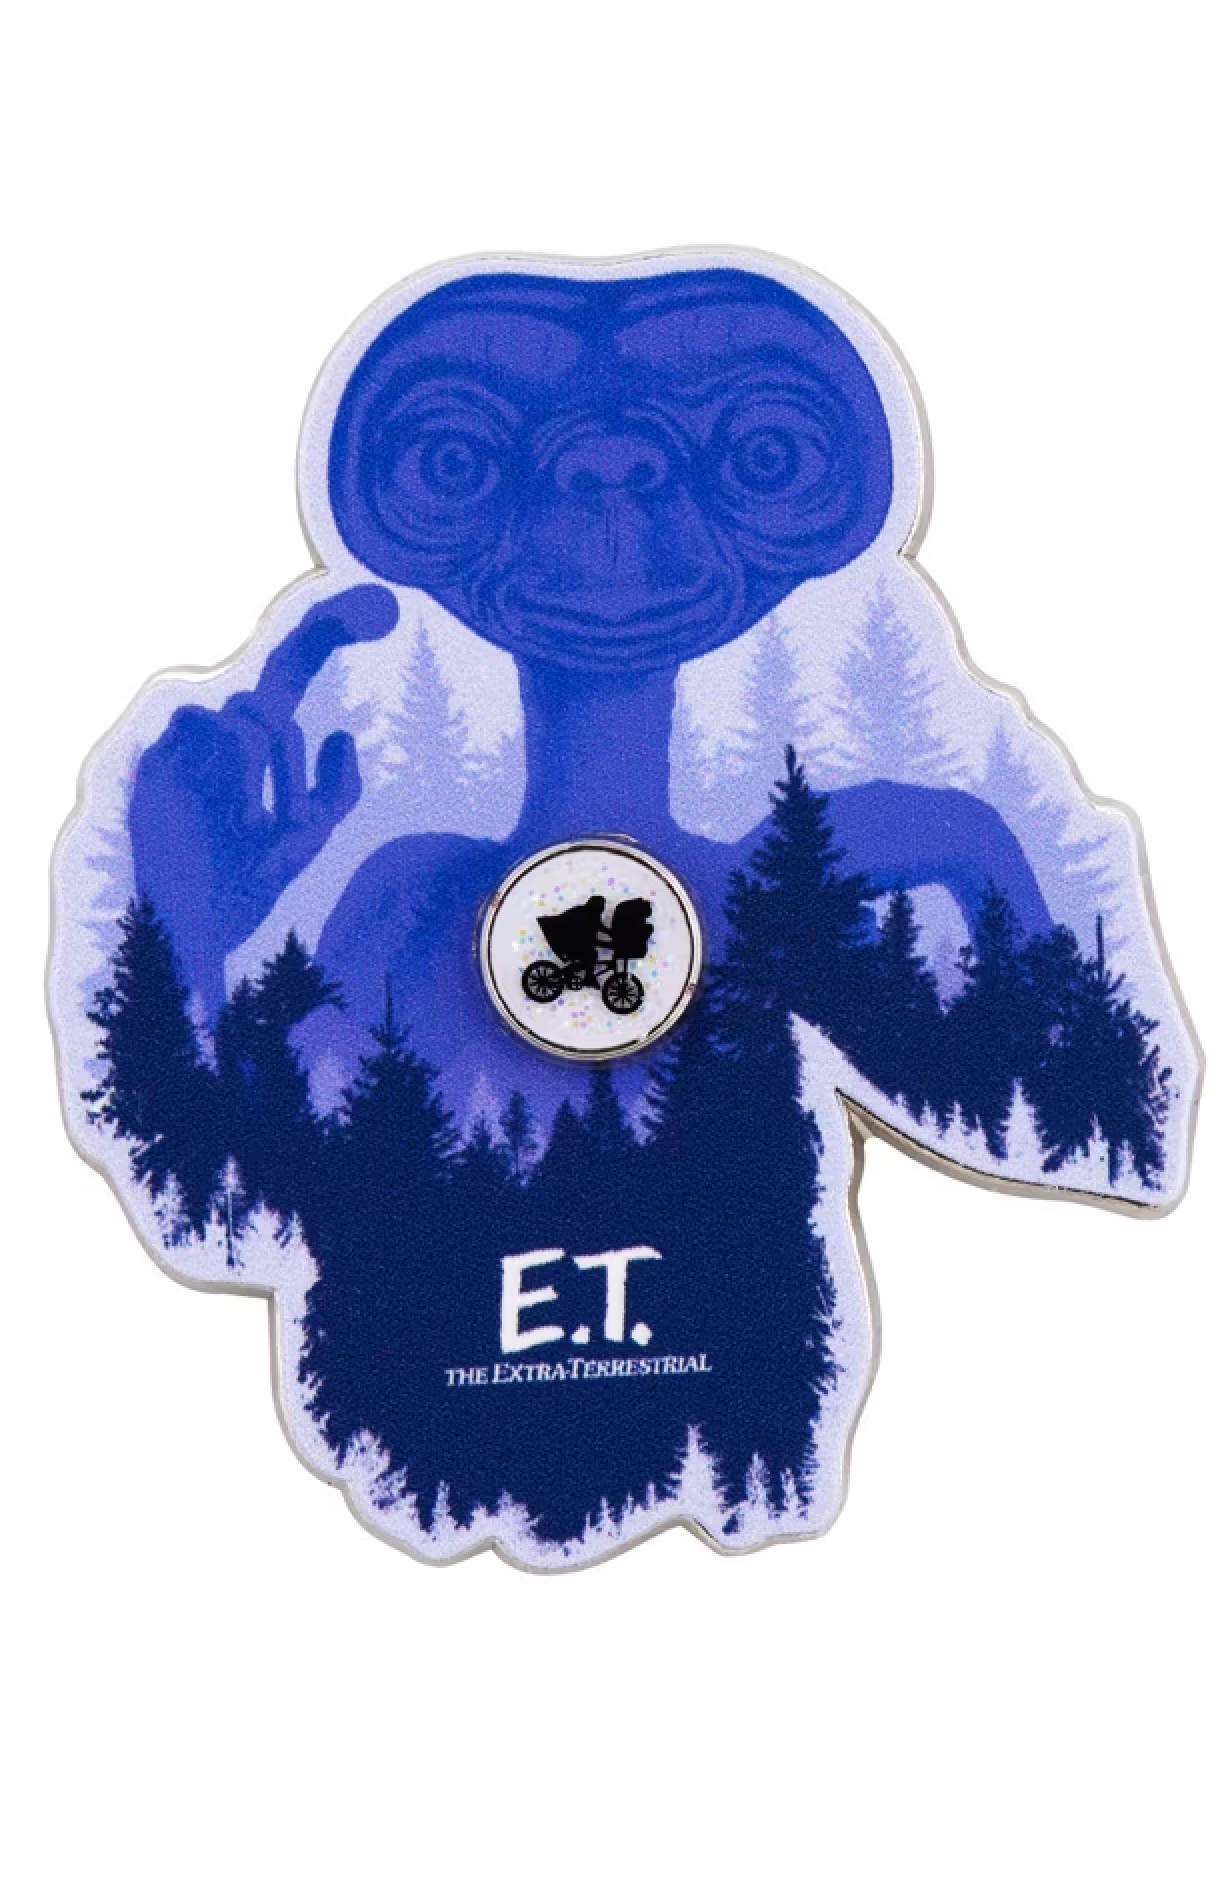 Universal Studios E.T. the Extra-Terrestrial Silhouette Pin New with Card